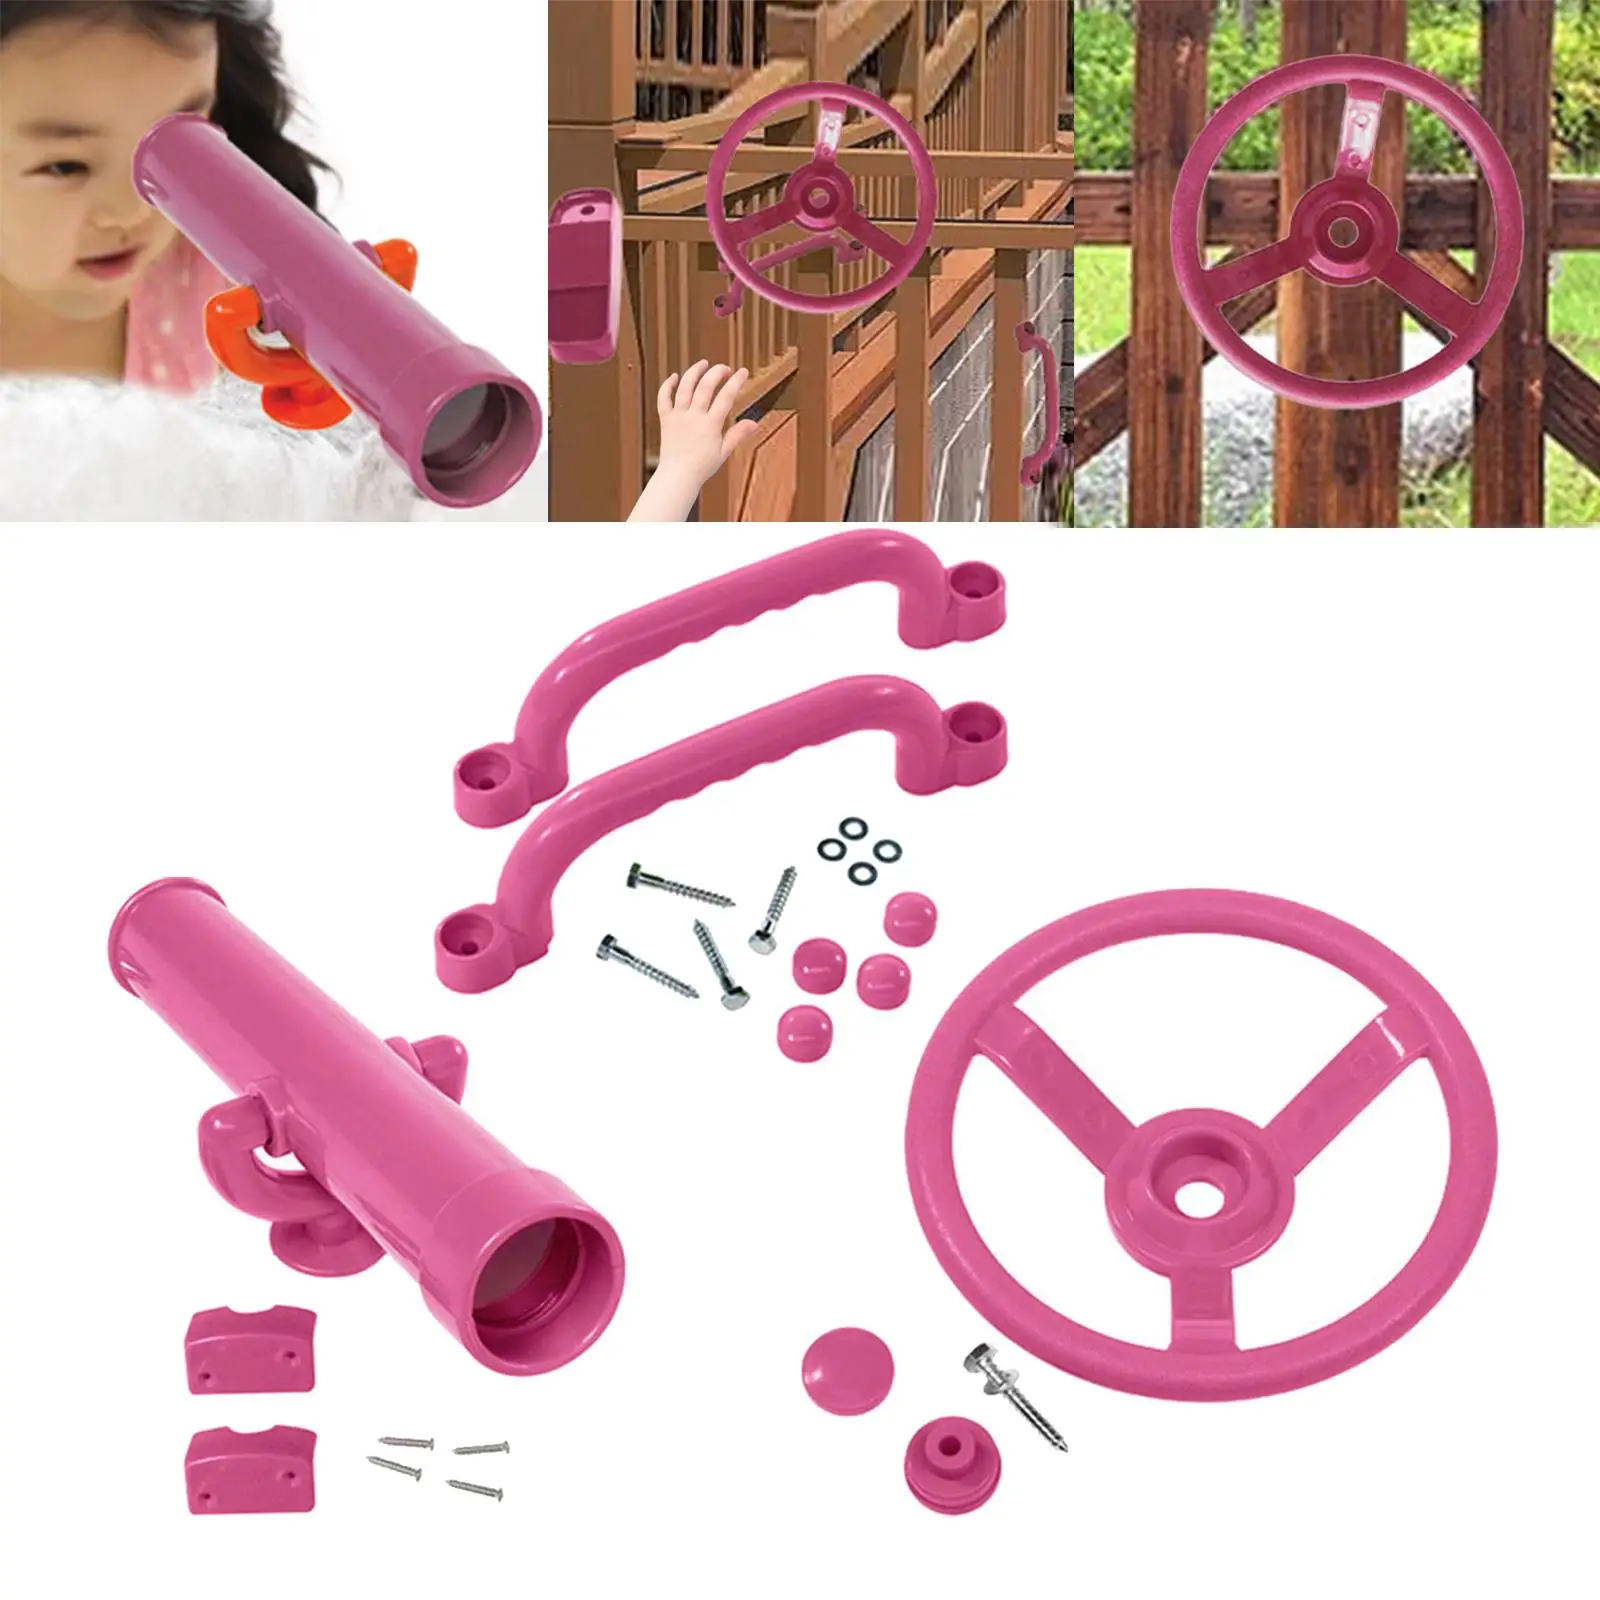 Playground Equipment Pirate Telescope Steering Wheel Handle Bars for Jungle Gym Tree House Climbing Frame Swingset Parts